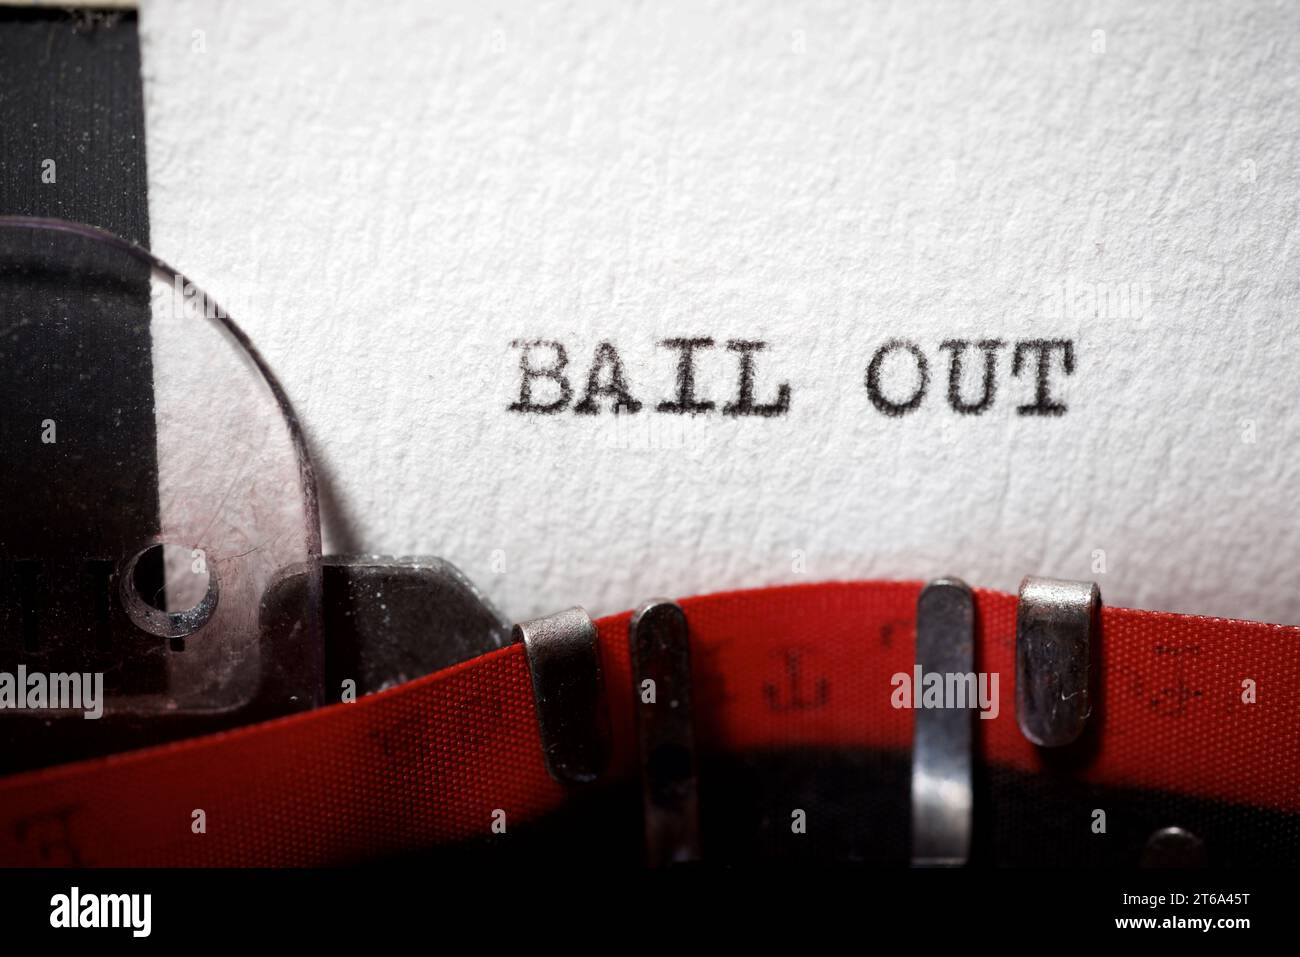 Bail out text written with a typewriter. Stock Photo